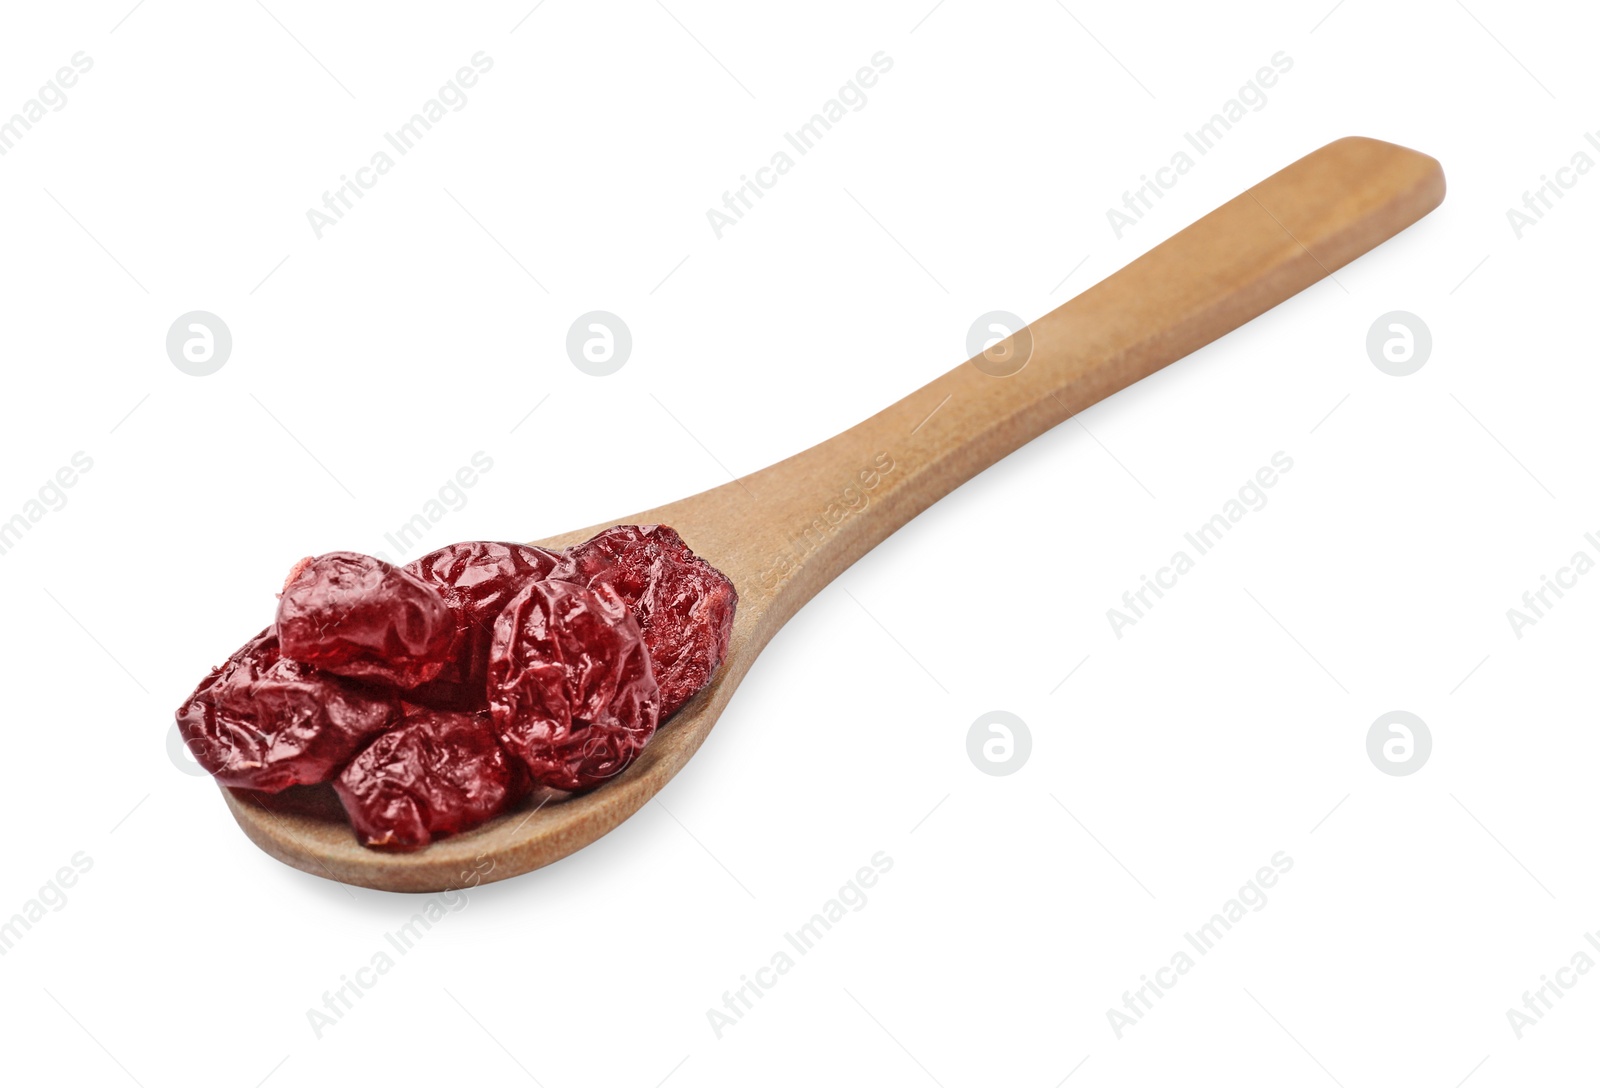 Photo of Spoon with dried cranberries isolated on white